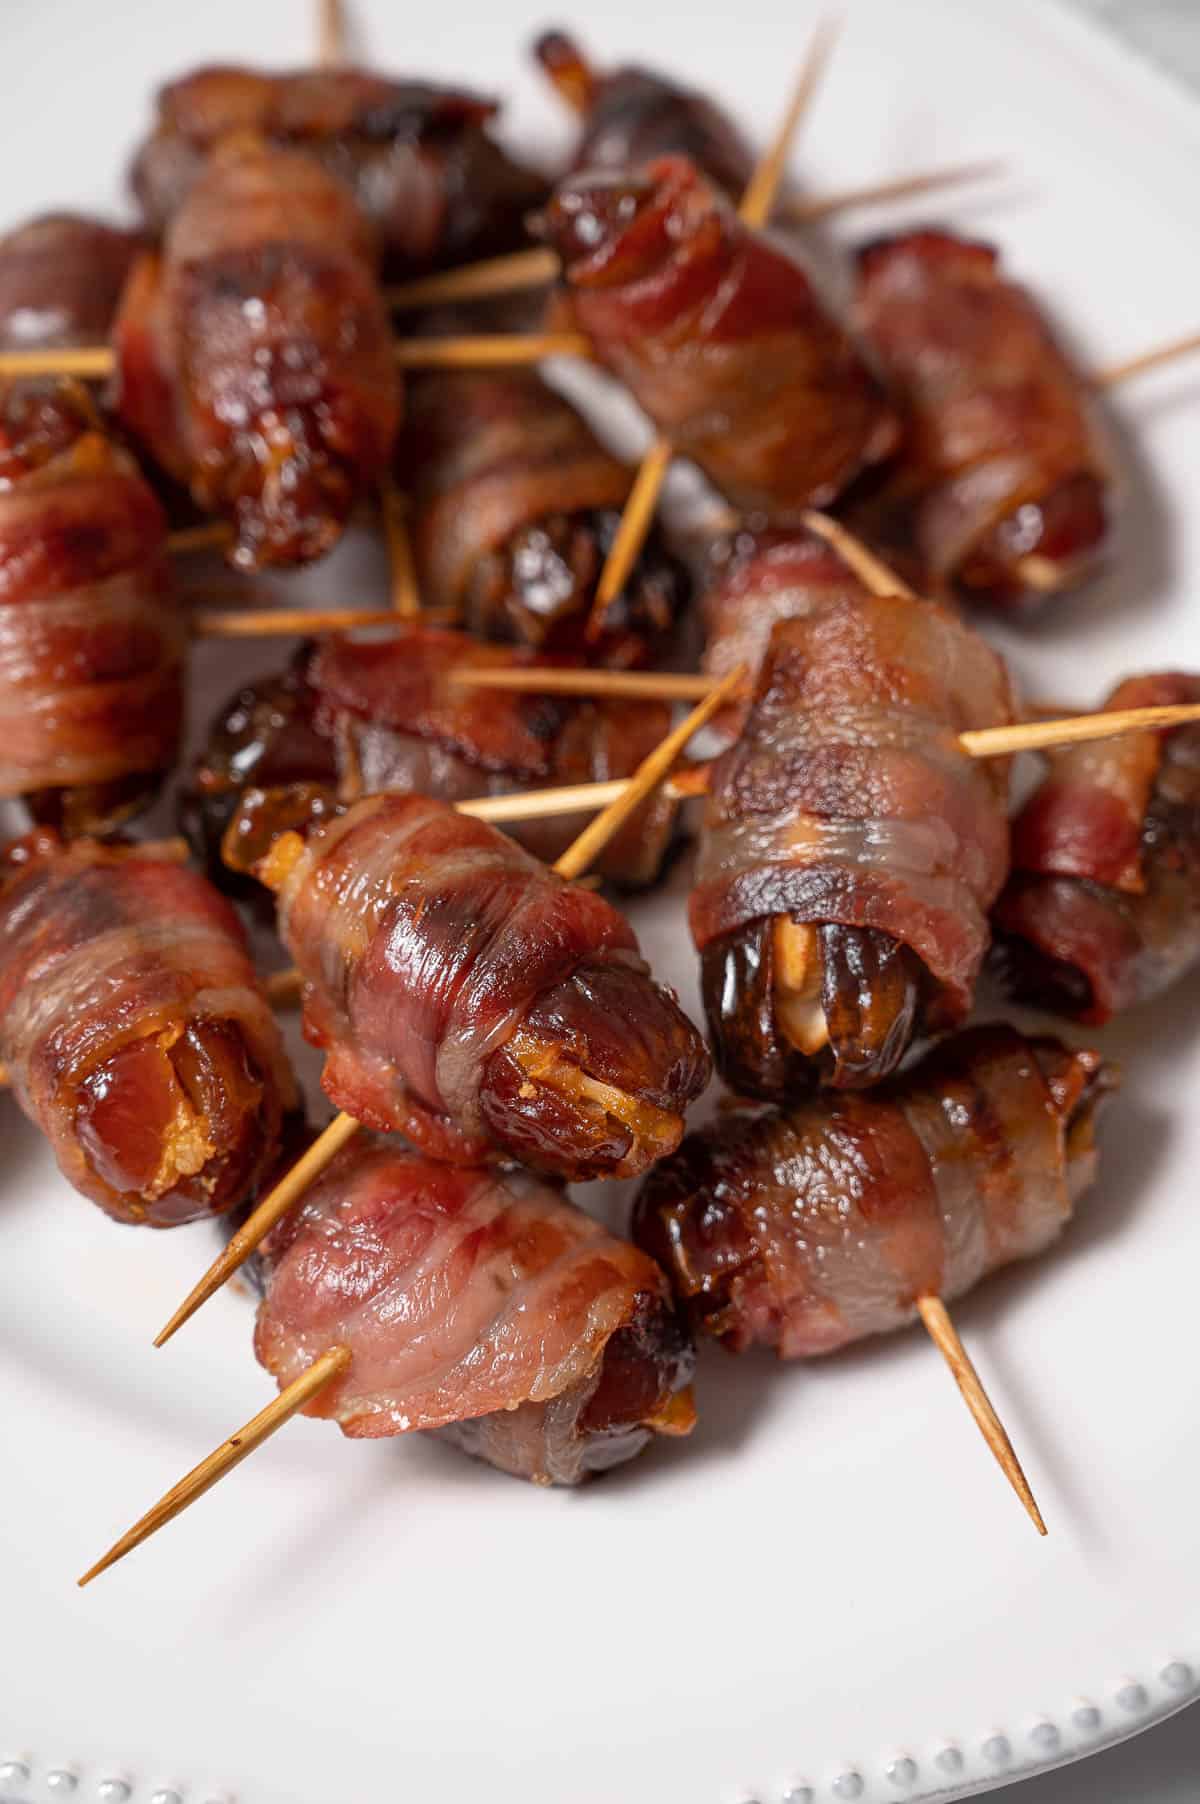 Bacon wrapped dates on a white plate.